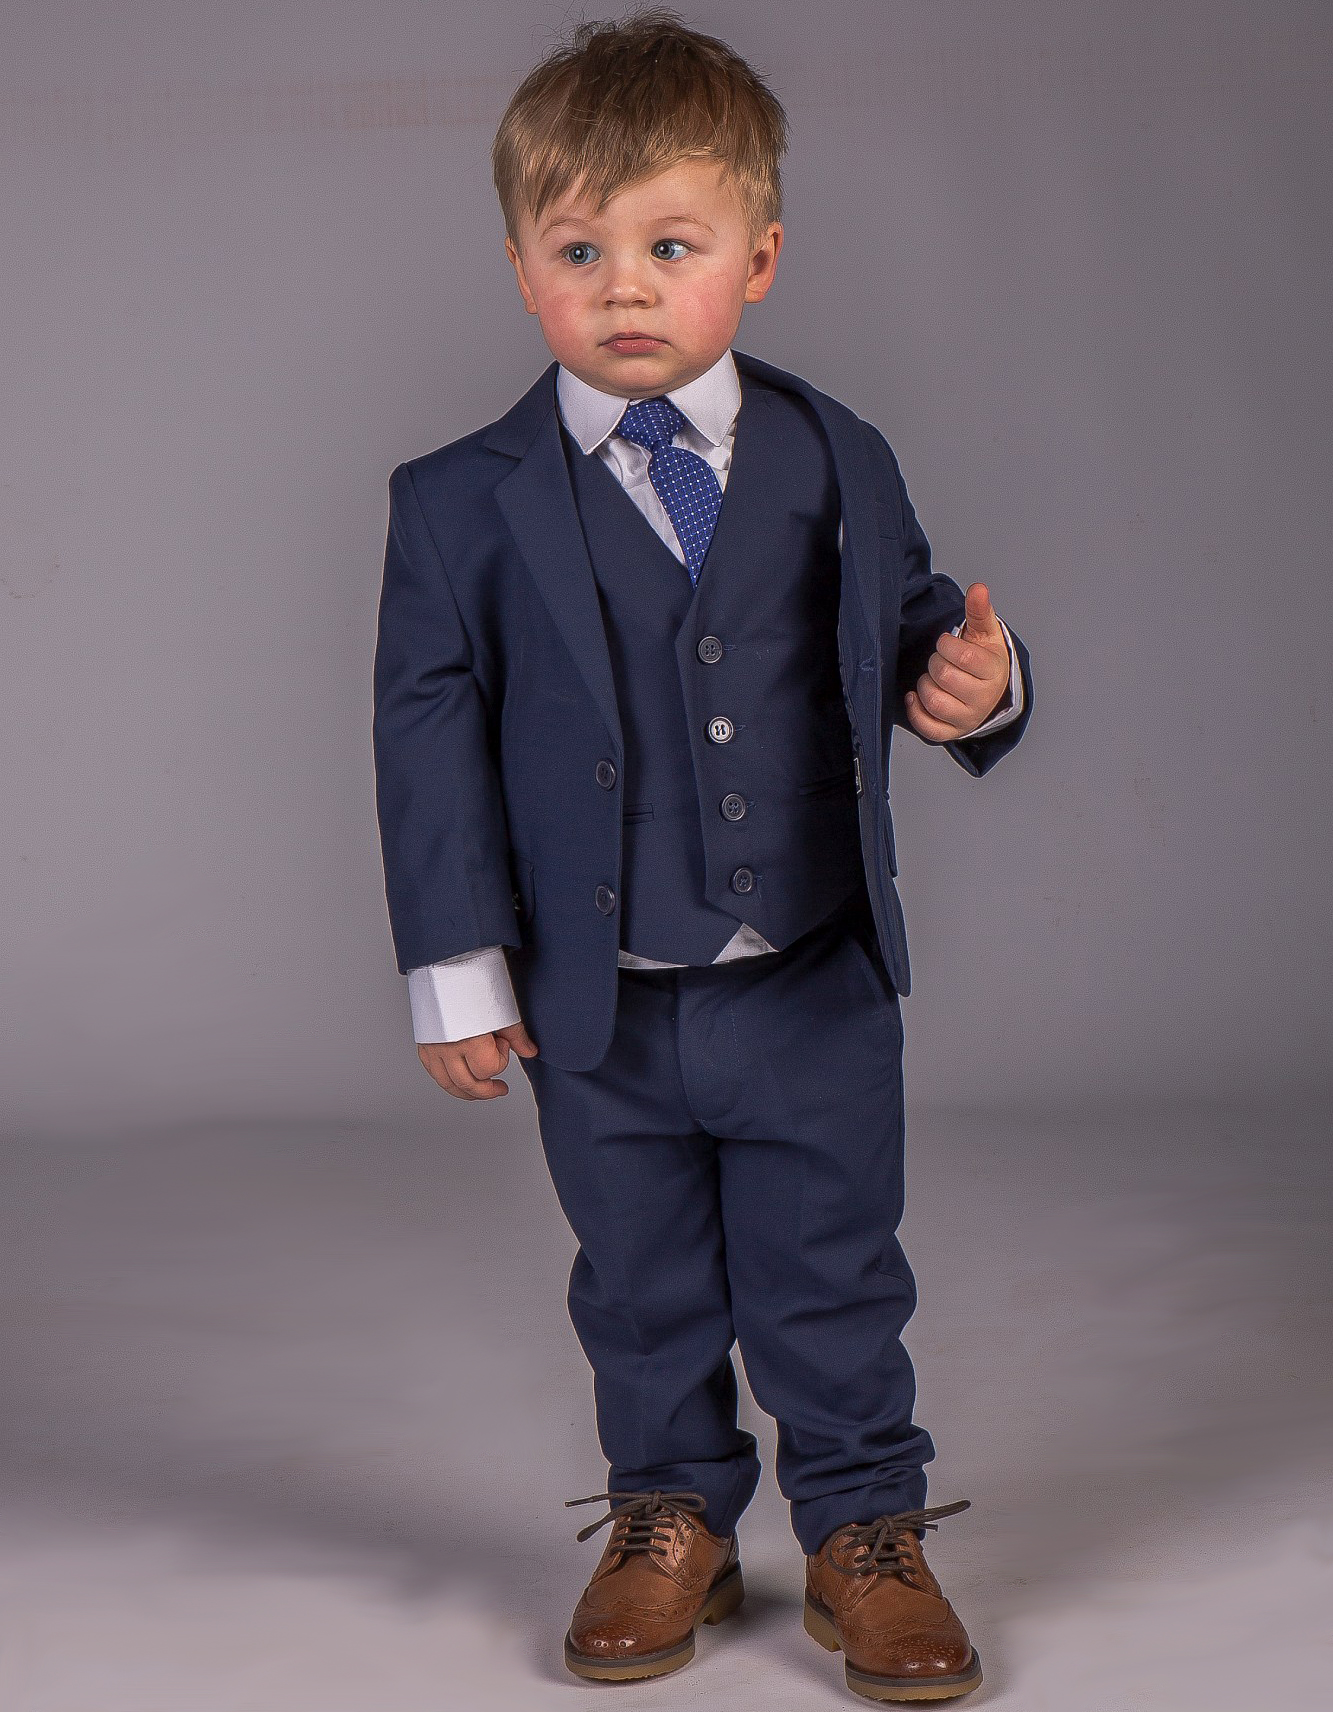 Boys Suits Grey 5 Piece Boys Wedding Suit Page Boy Party Ceremony Prom 9 Months to 14 Years 